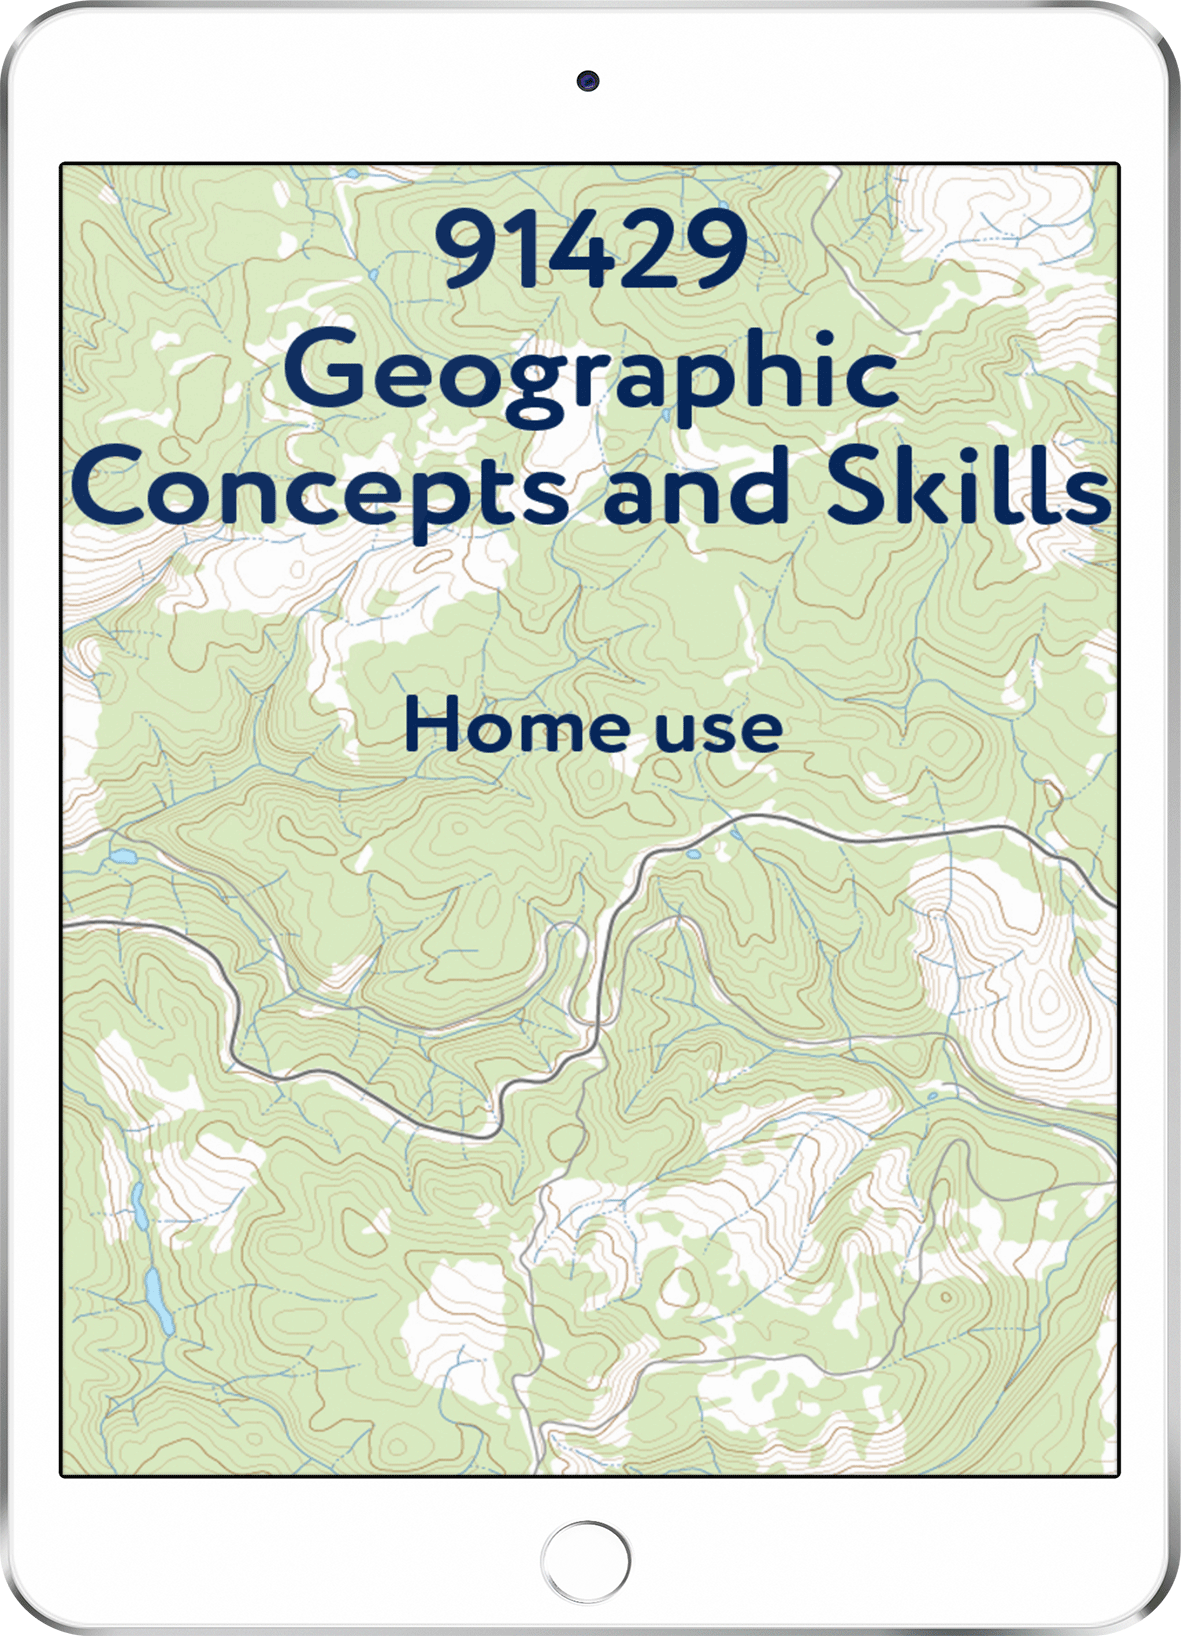 91429 Geographic Concepts and Skills - Home Use